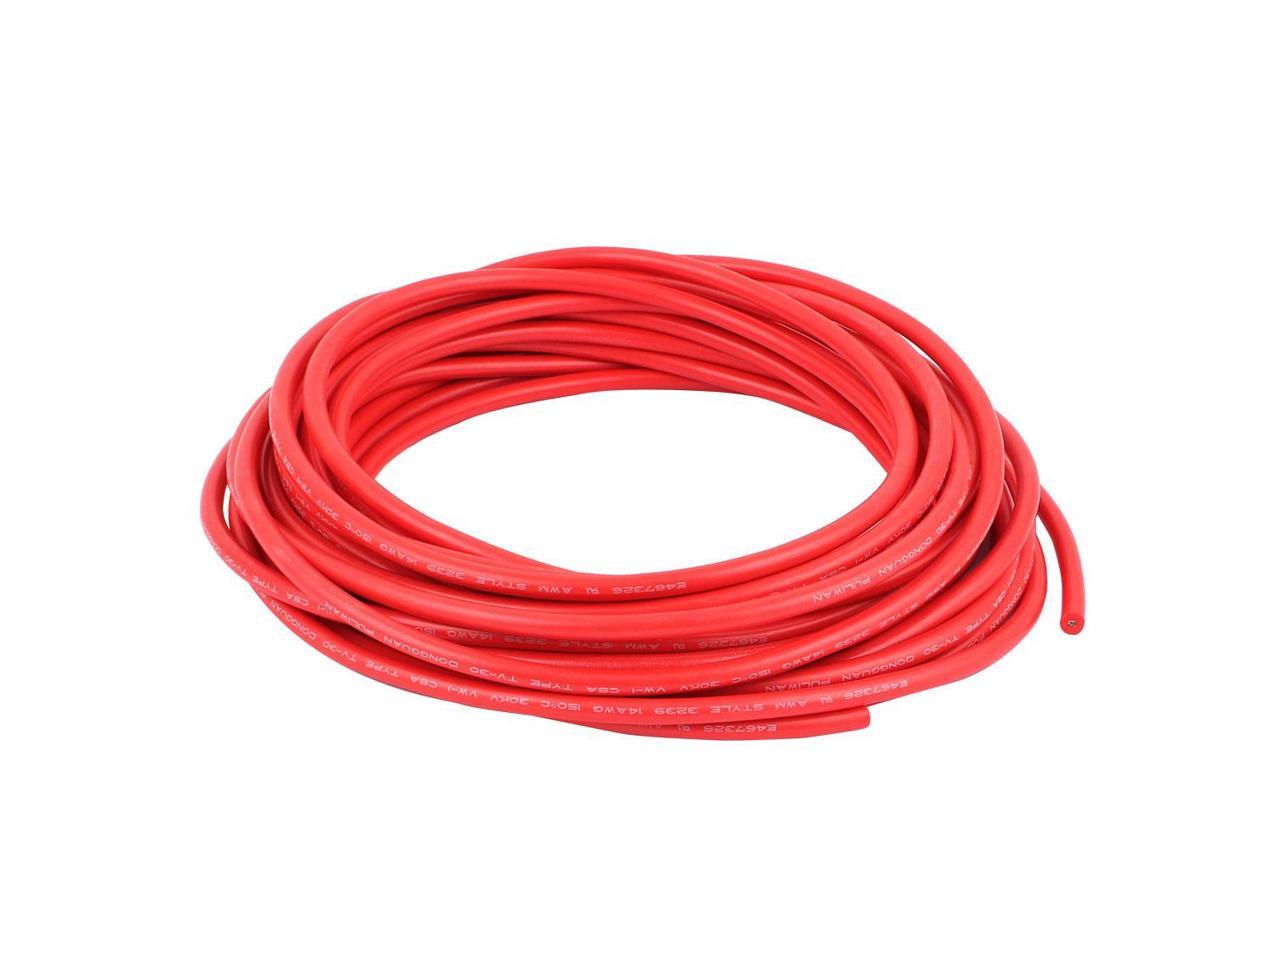 Electric Copper Core Flexible Silicone Wire Cable White 10M 32.8Ft 18AWG 30KV 